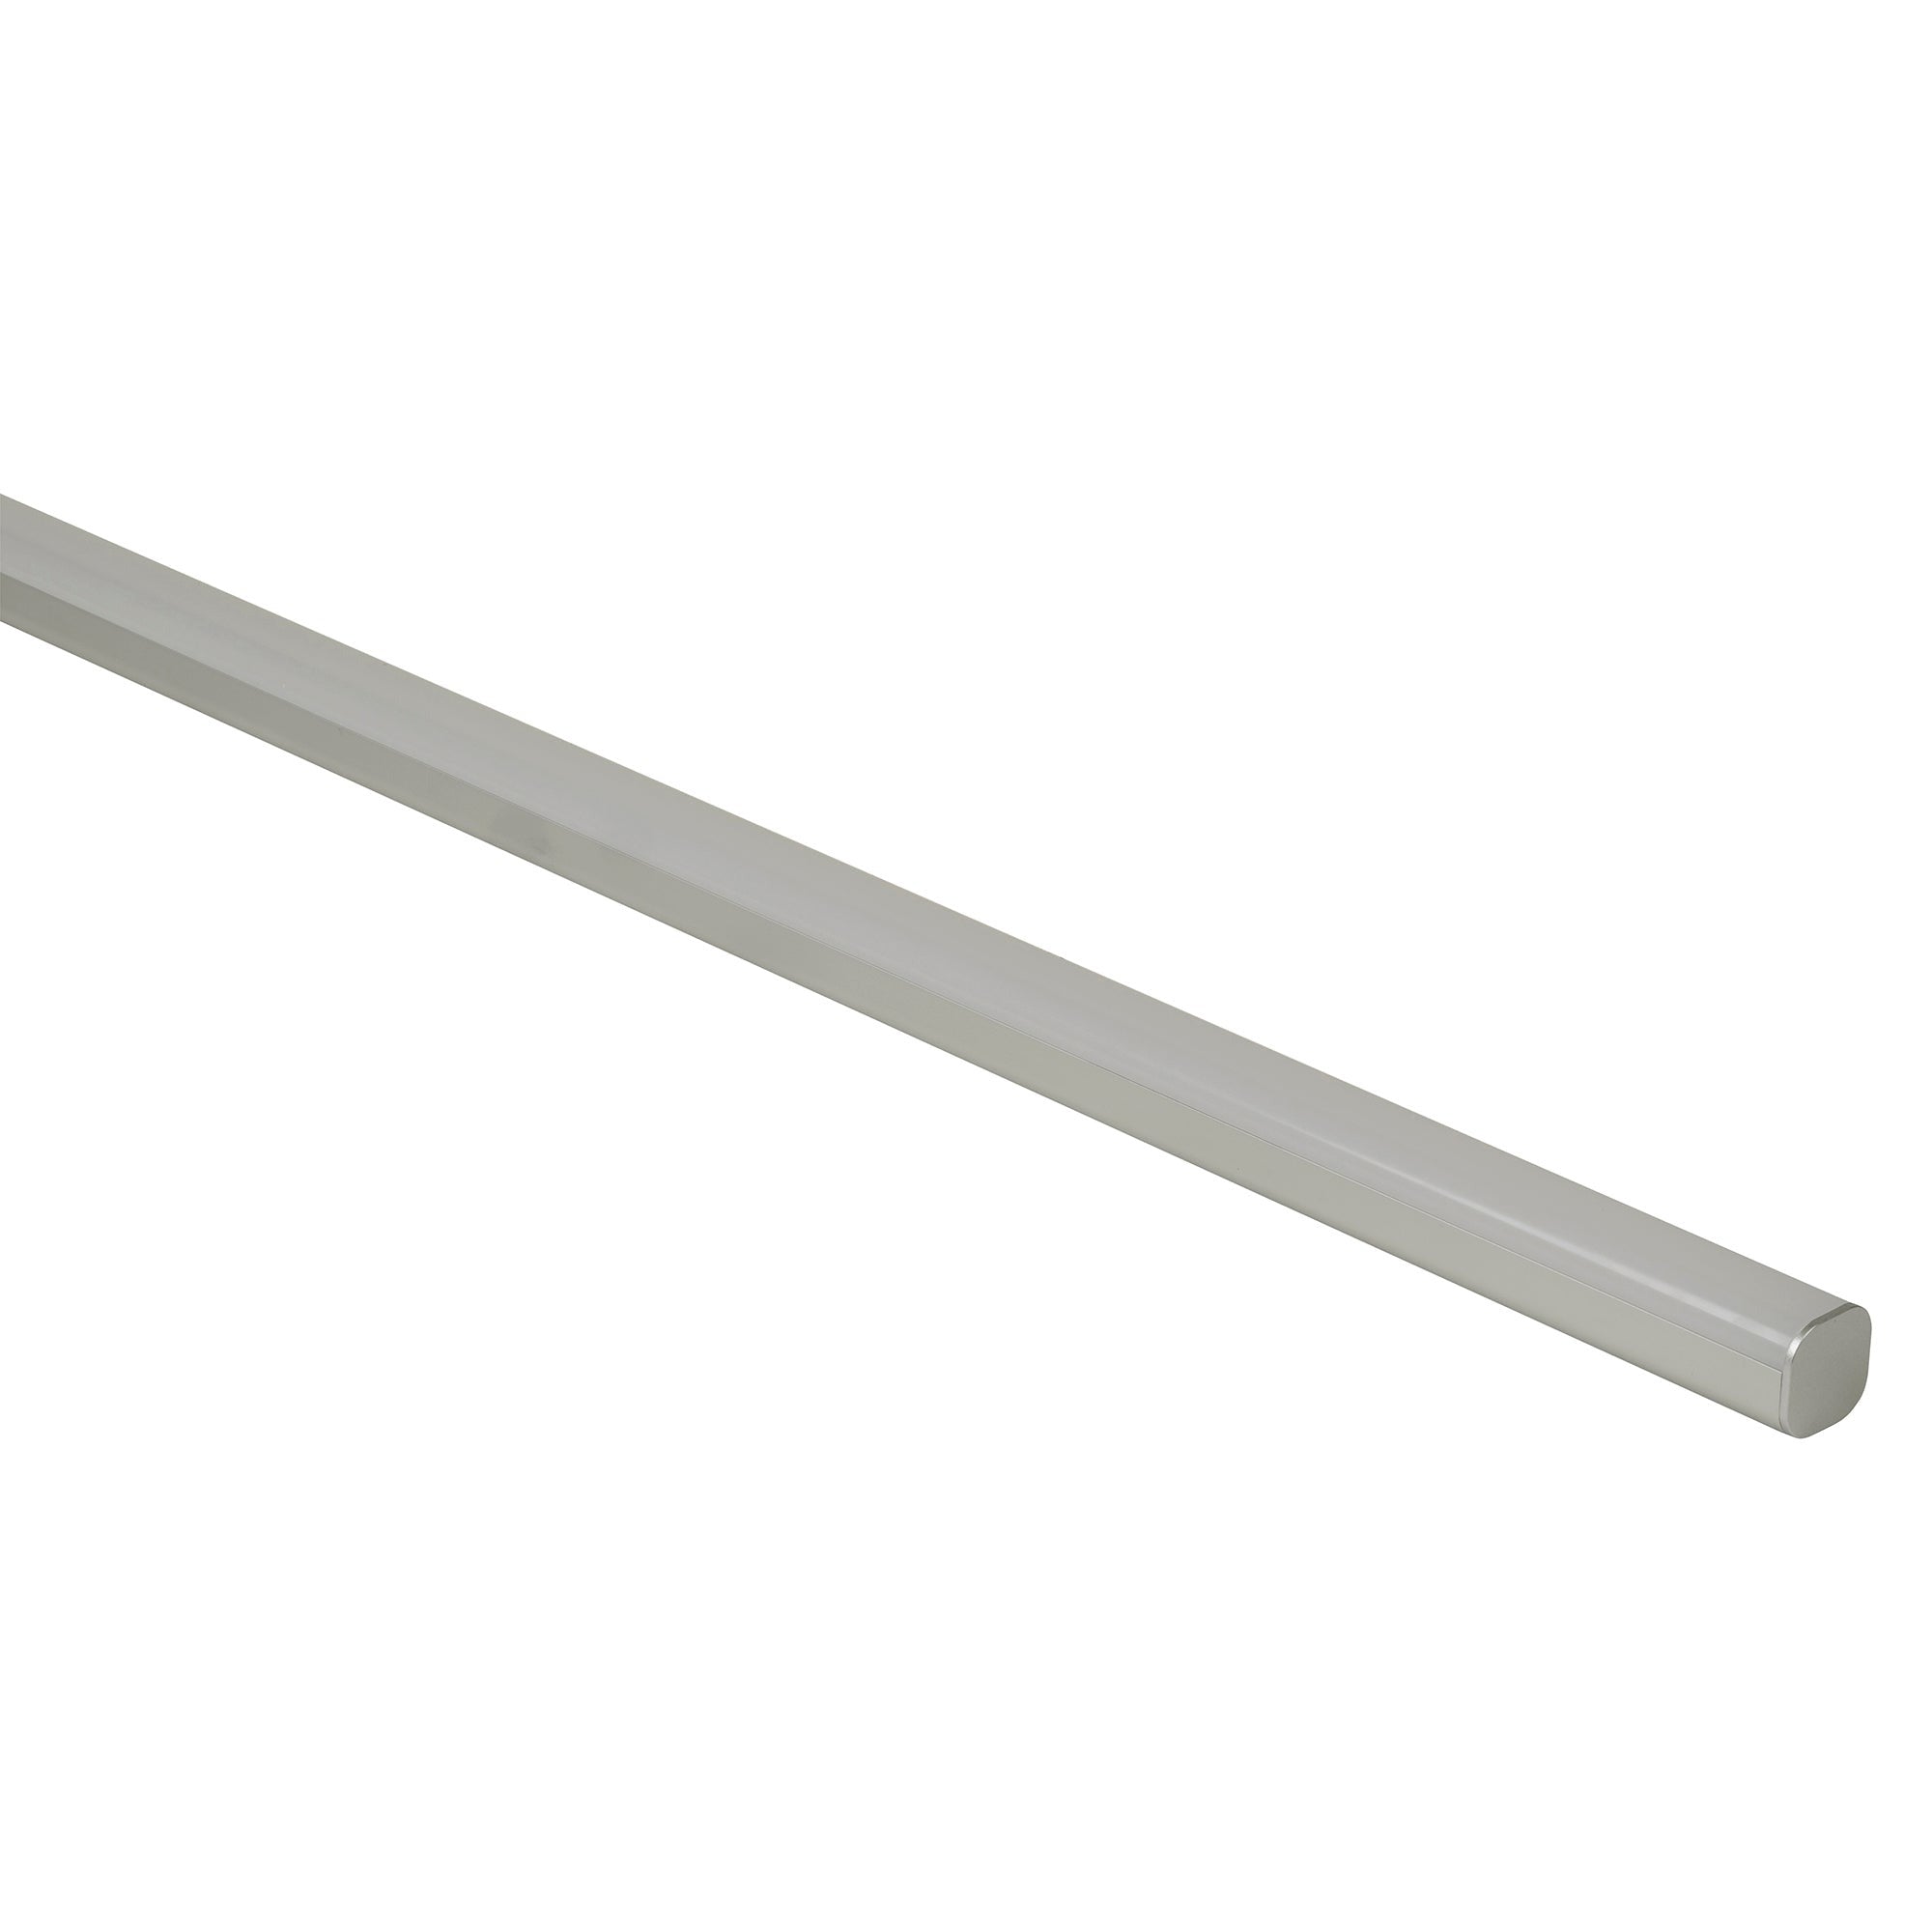 HV9693-3030 - Aluminium Profile with Rounded Diffuser